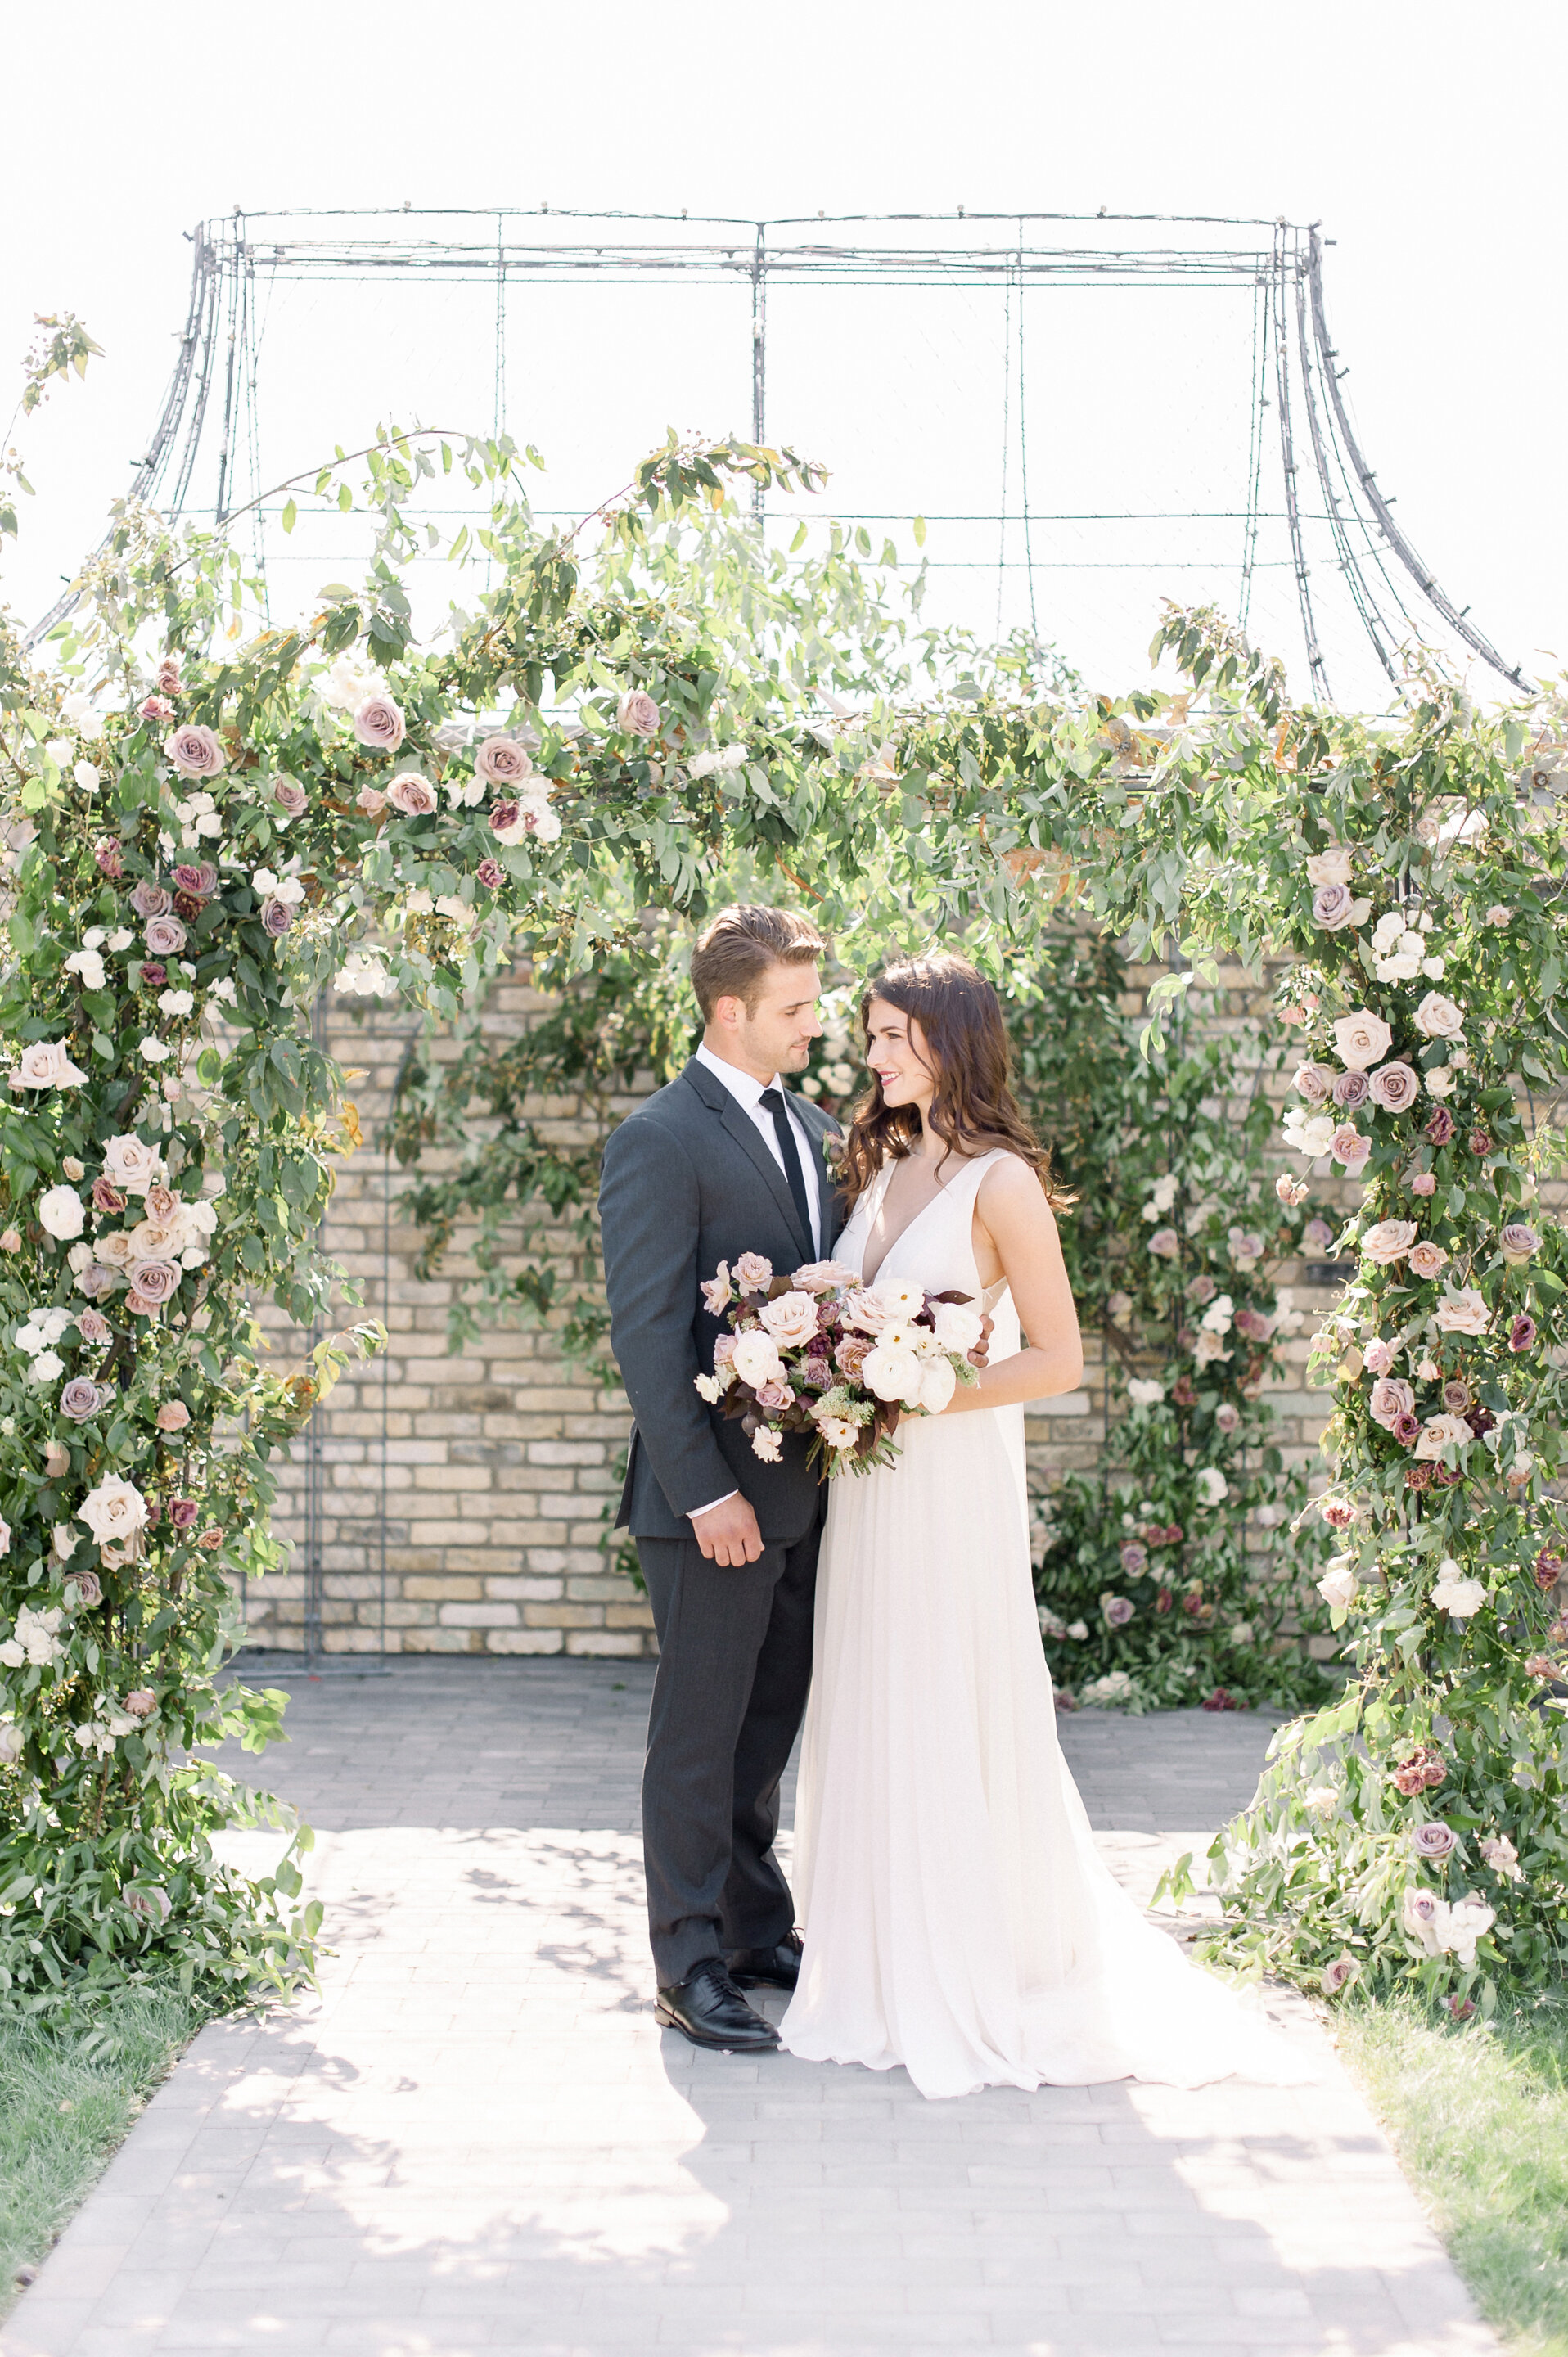  Photography by: Maria Mack  Gown: BHLDN  Groom’s Attire: The Black Tux  Jewelry: L. Priori  Glam: Hayley Annino  Design: Arielle Fera Events  Florals: Twisted Willow Flowers  Rentals: White Glove Rentals   